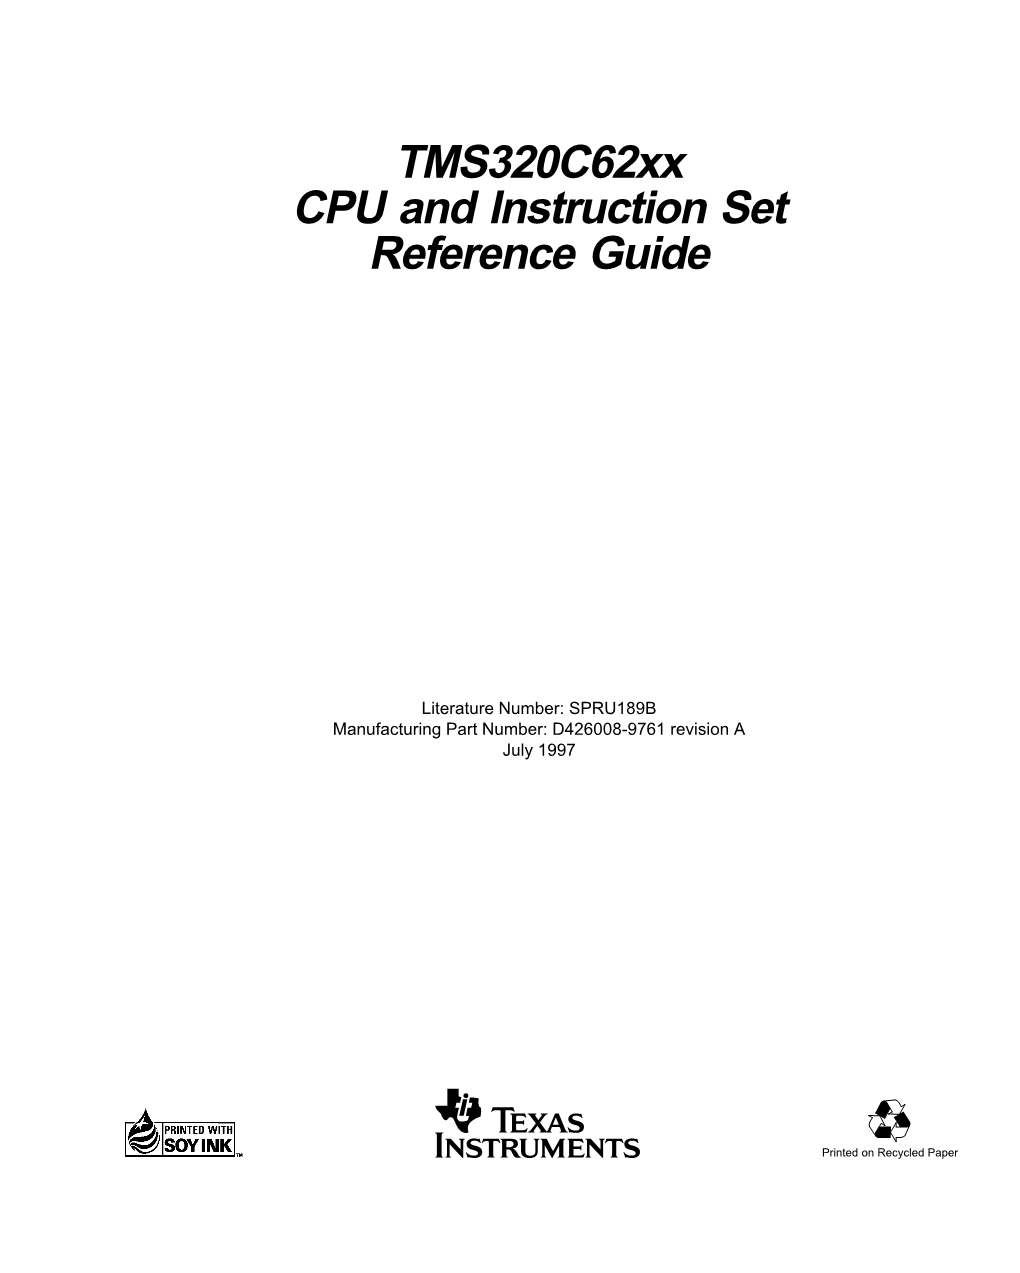 Tms320c62xx CPU and Instruction Set Reference Guide